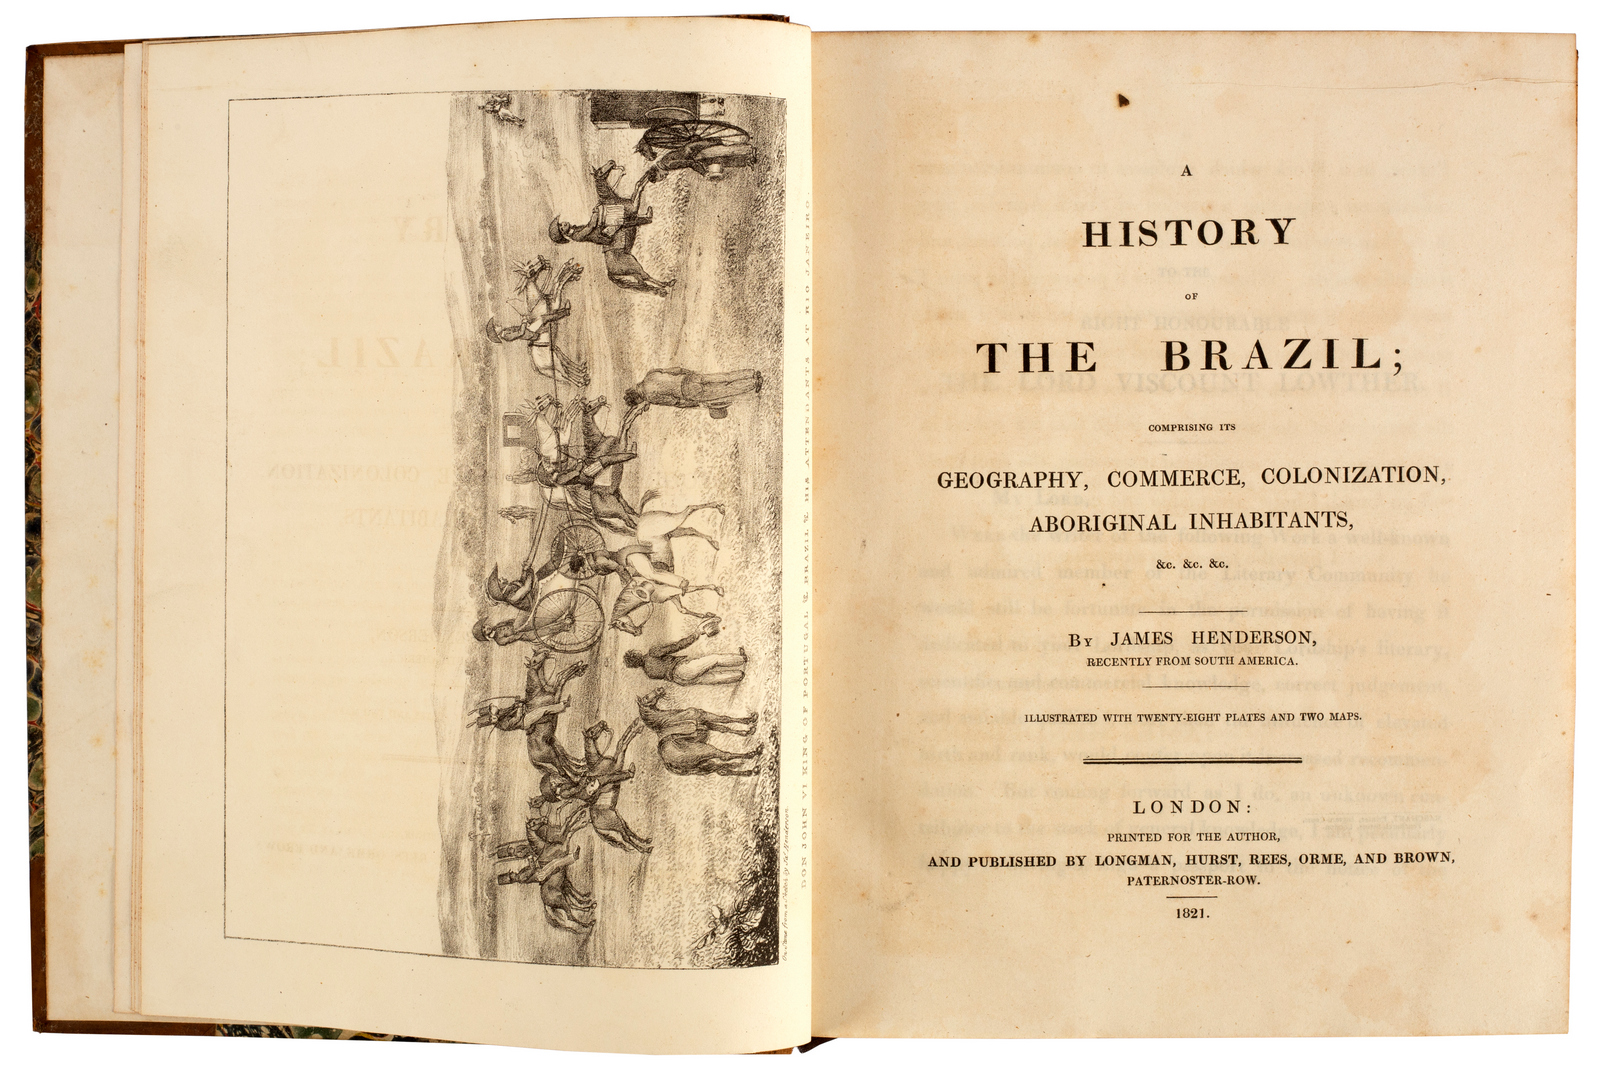 Henderson (James) A History of the Brazil, 1821. 4to., cont. half mottled calf.